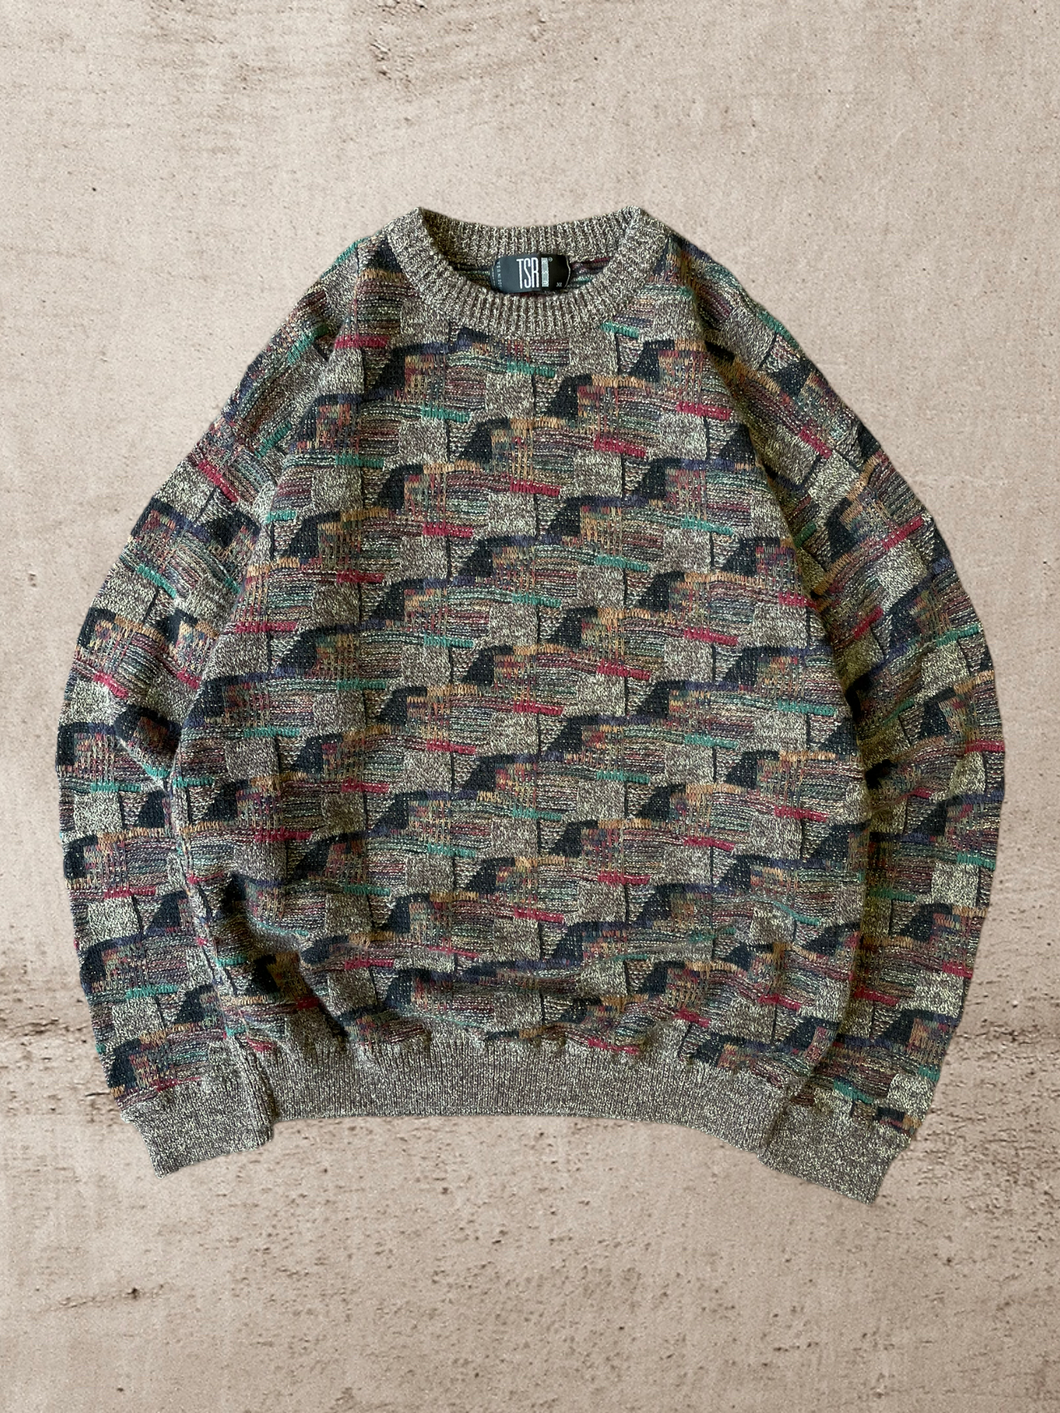 90s TSR Multicolor Knit Sweater - X-Large